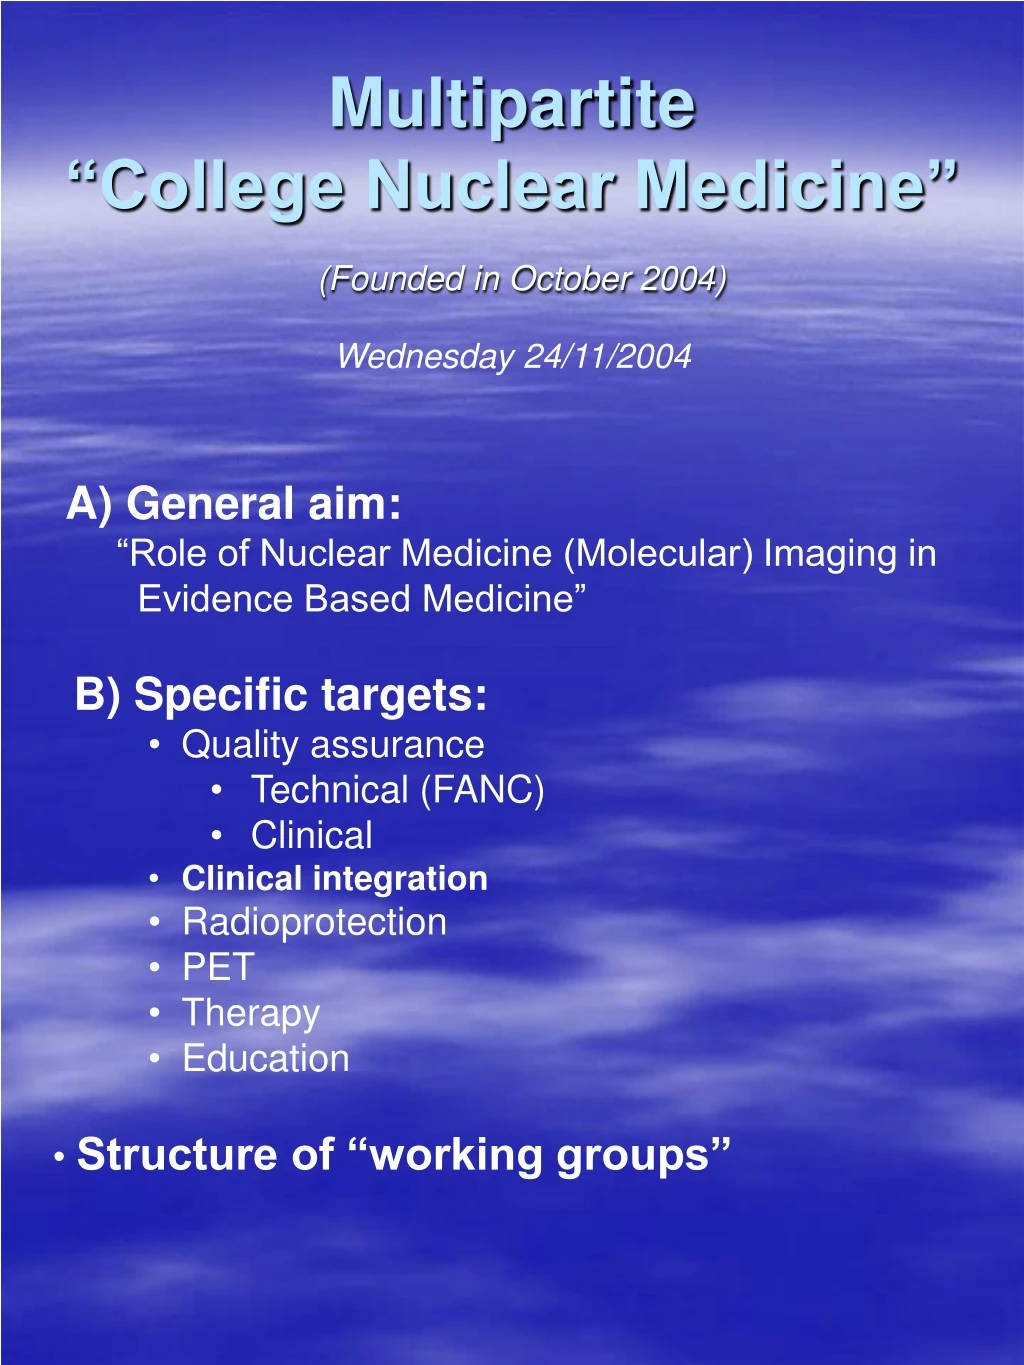 multipartite college nuclear medicine founded in october 2004